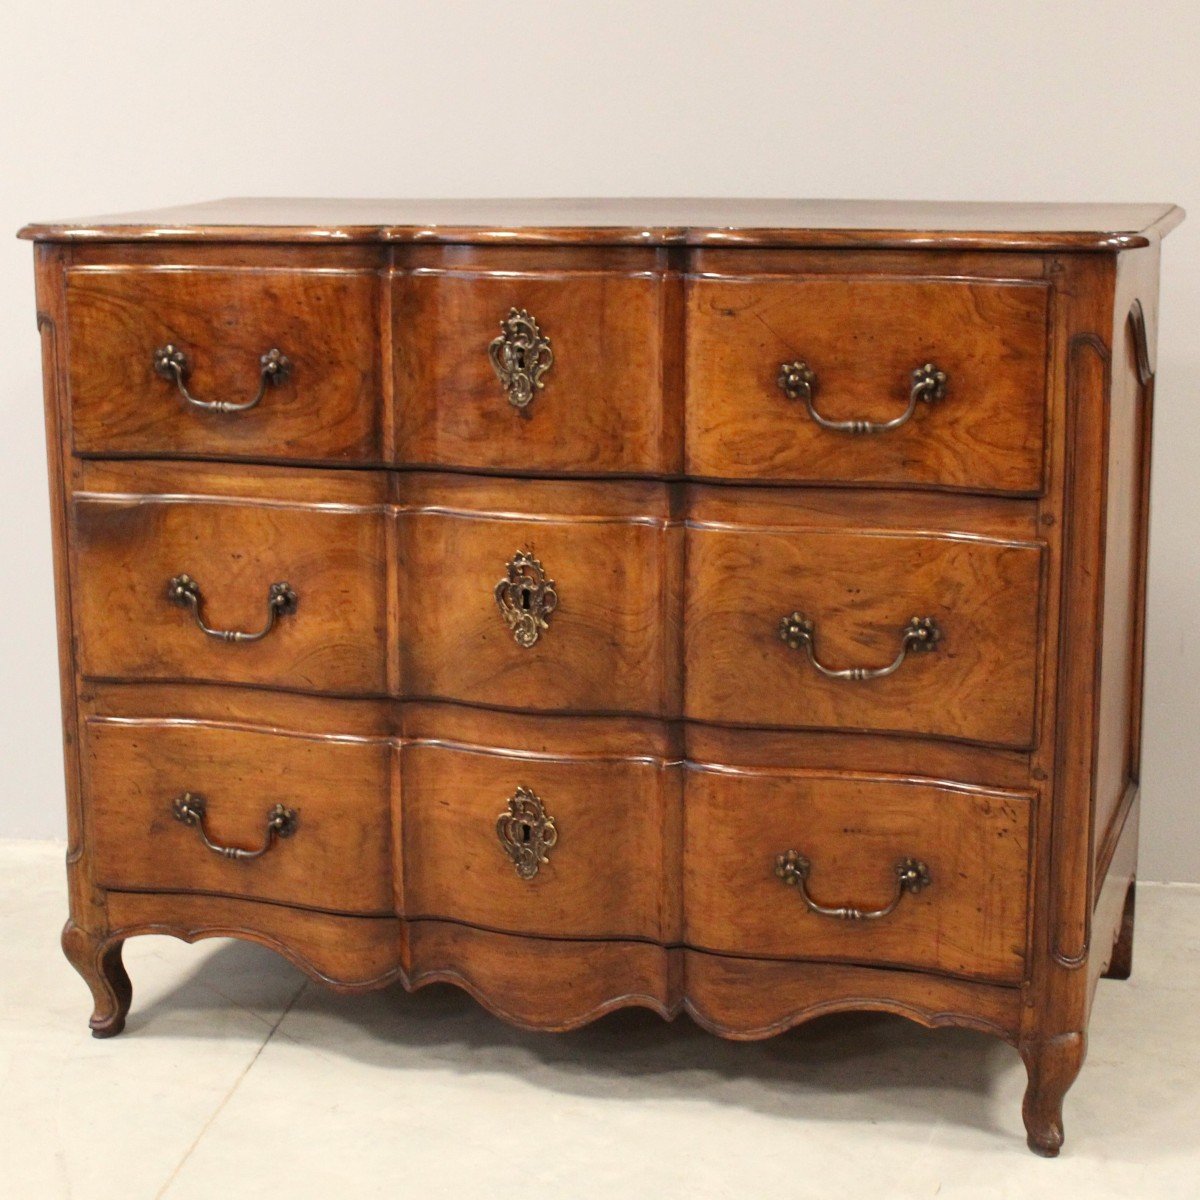 Antique Louis XV Dresser Commode Chest Of Drawers In Walnut – 18th